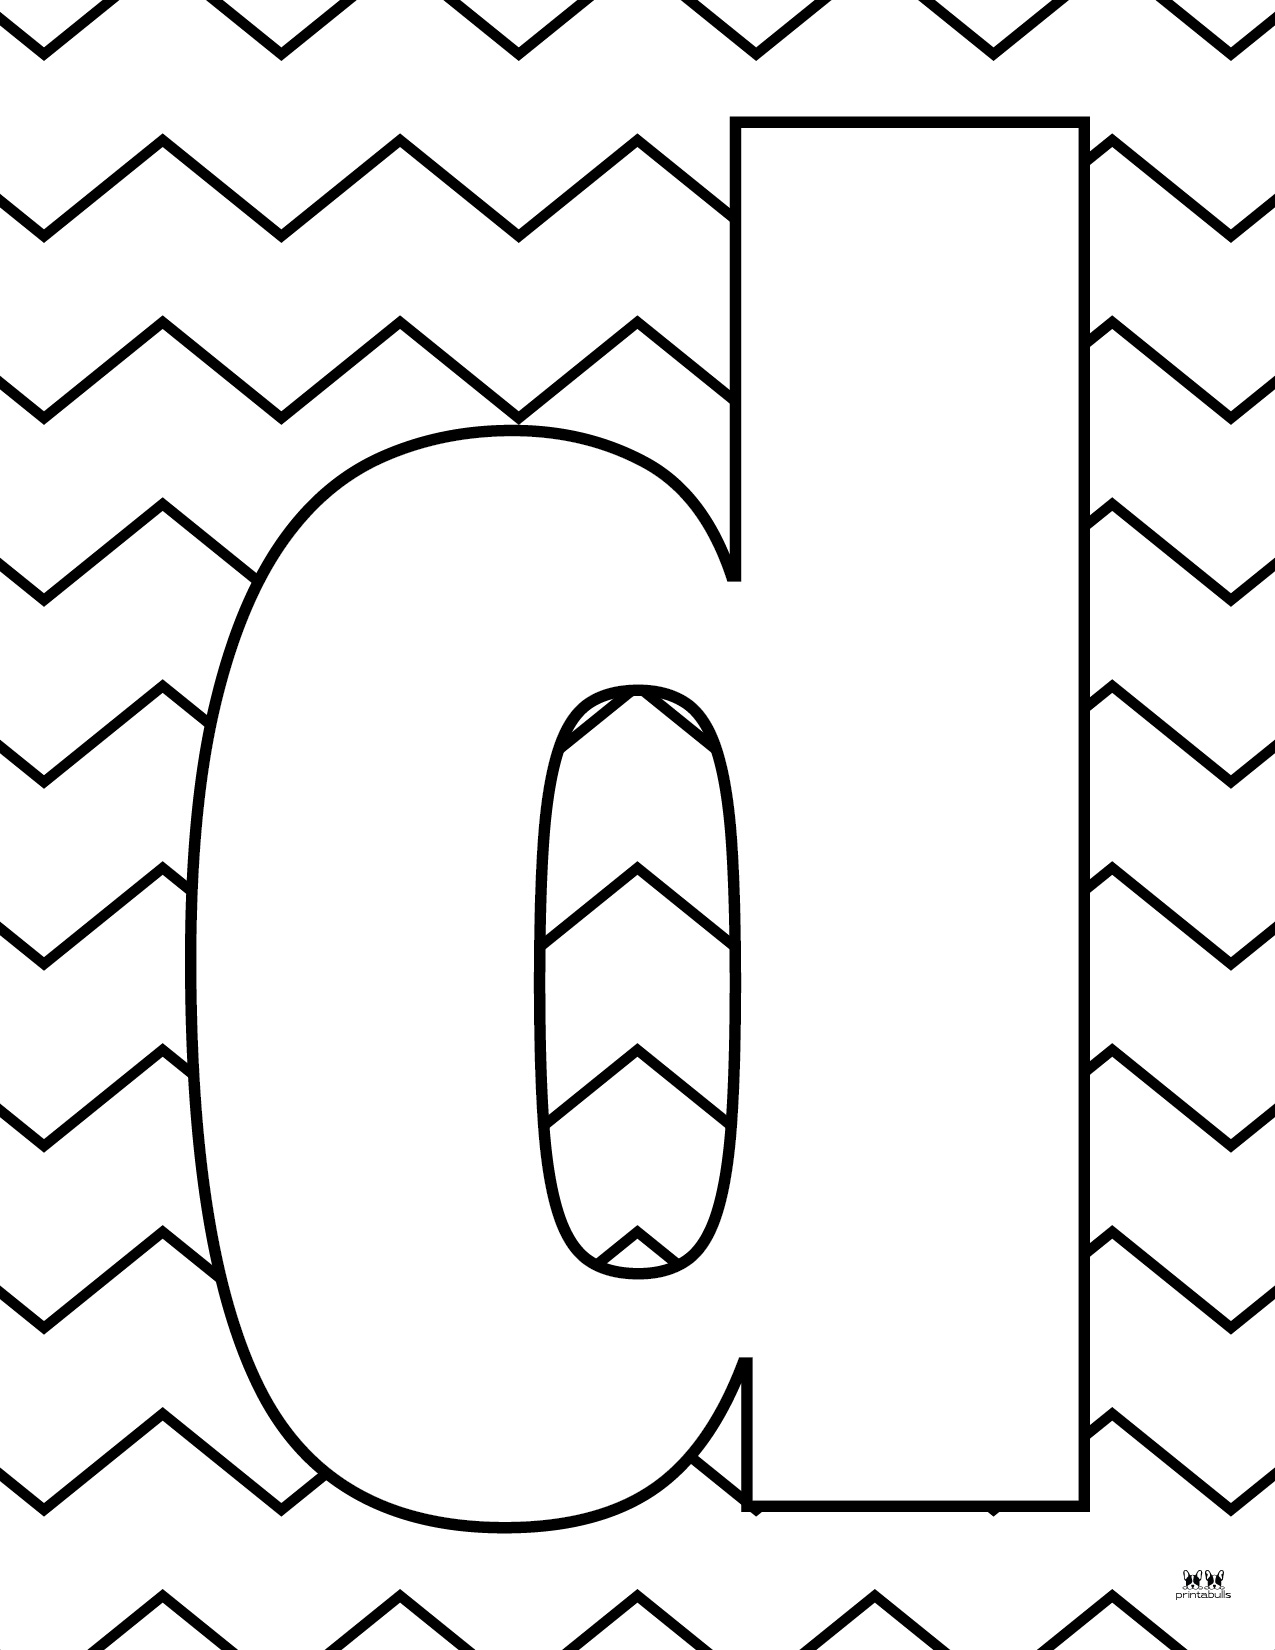 Letter D Coloring Pages - 15 FREE Pages - PrintaBulk